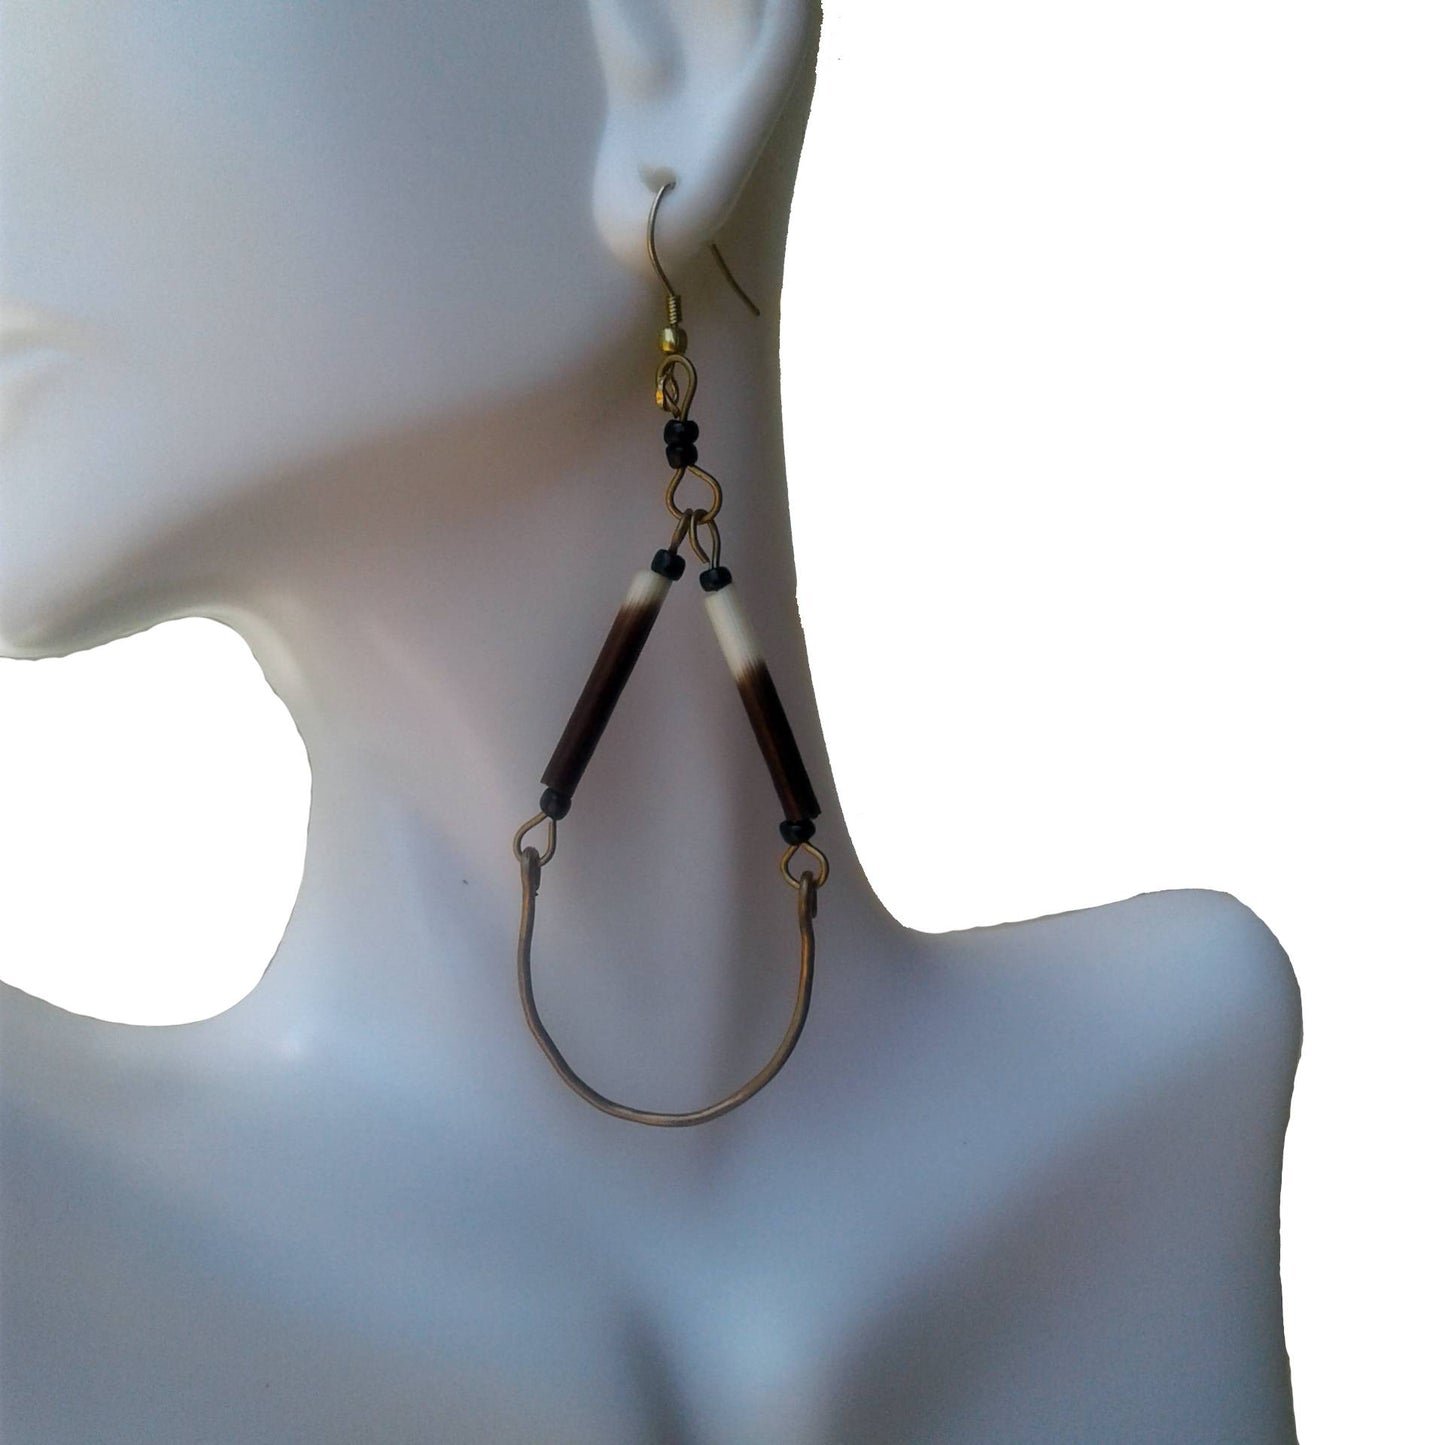 Porcupine Quill Oval Hoop Earrings